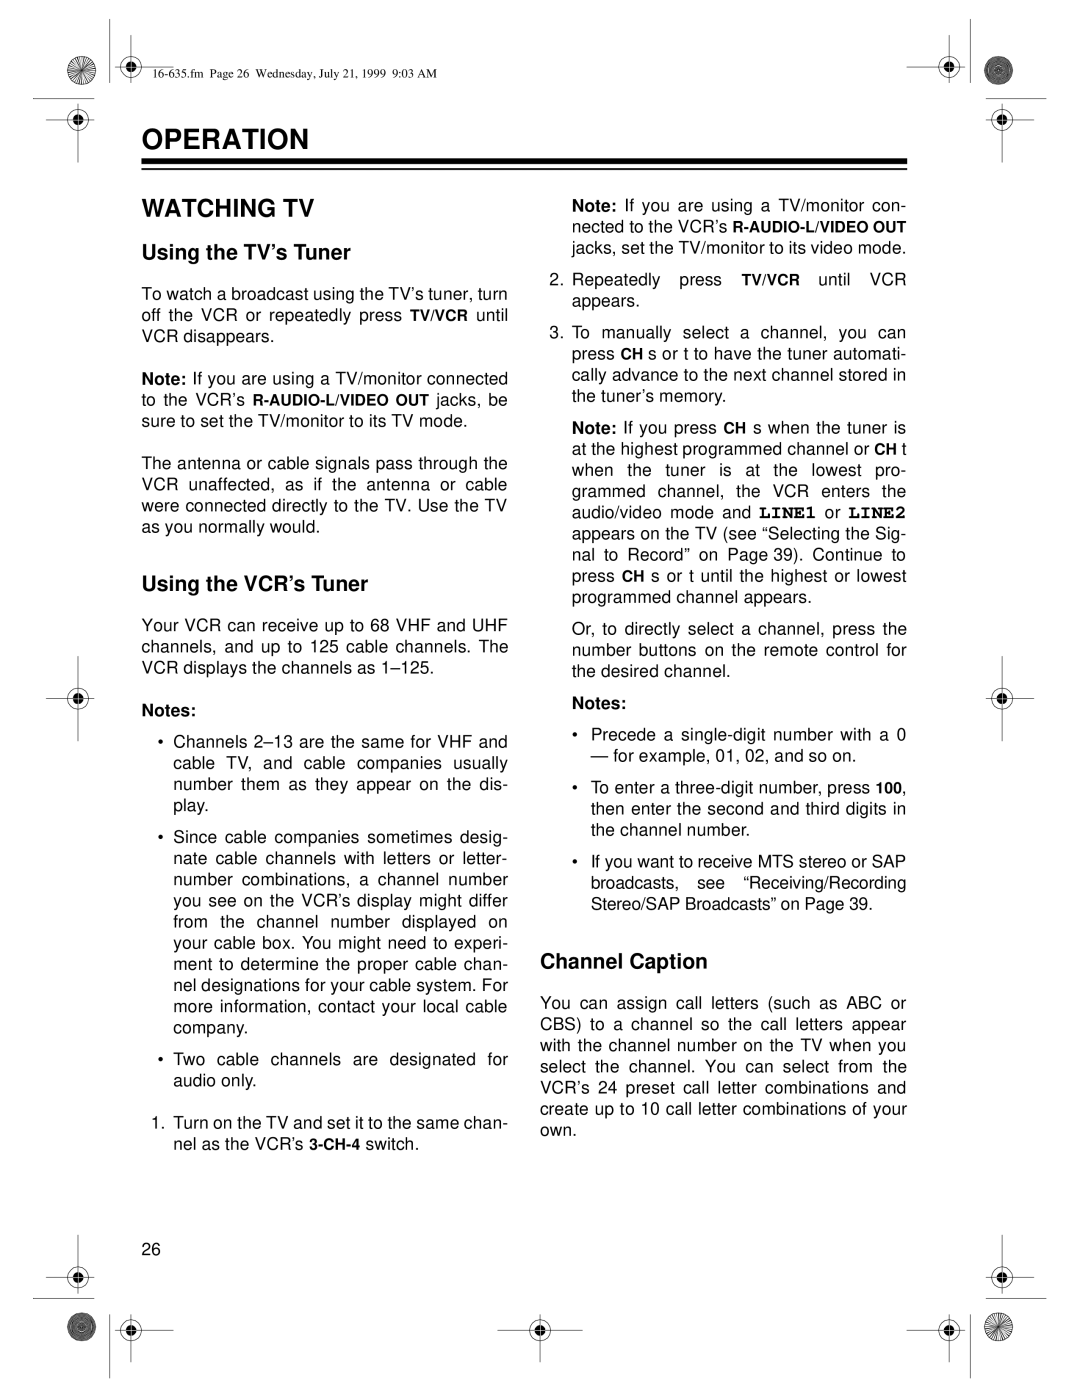 Radio Shack 66 owner manual Operation, Watching Tv, Using the TV’s Tuner, Using the VCR’s Tuner, Channel Caption 